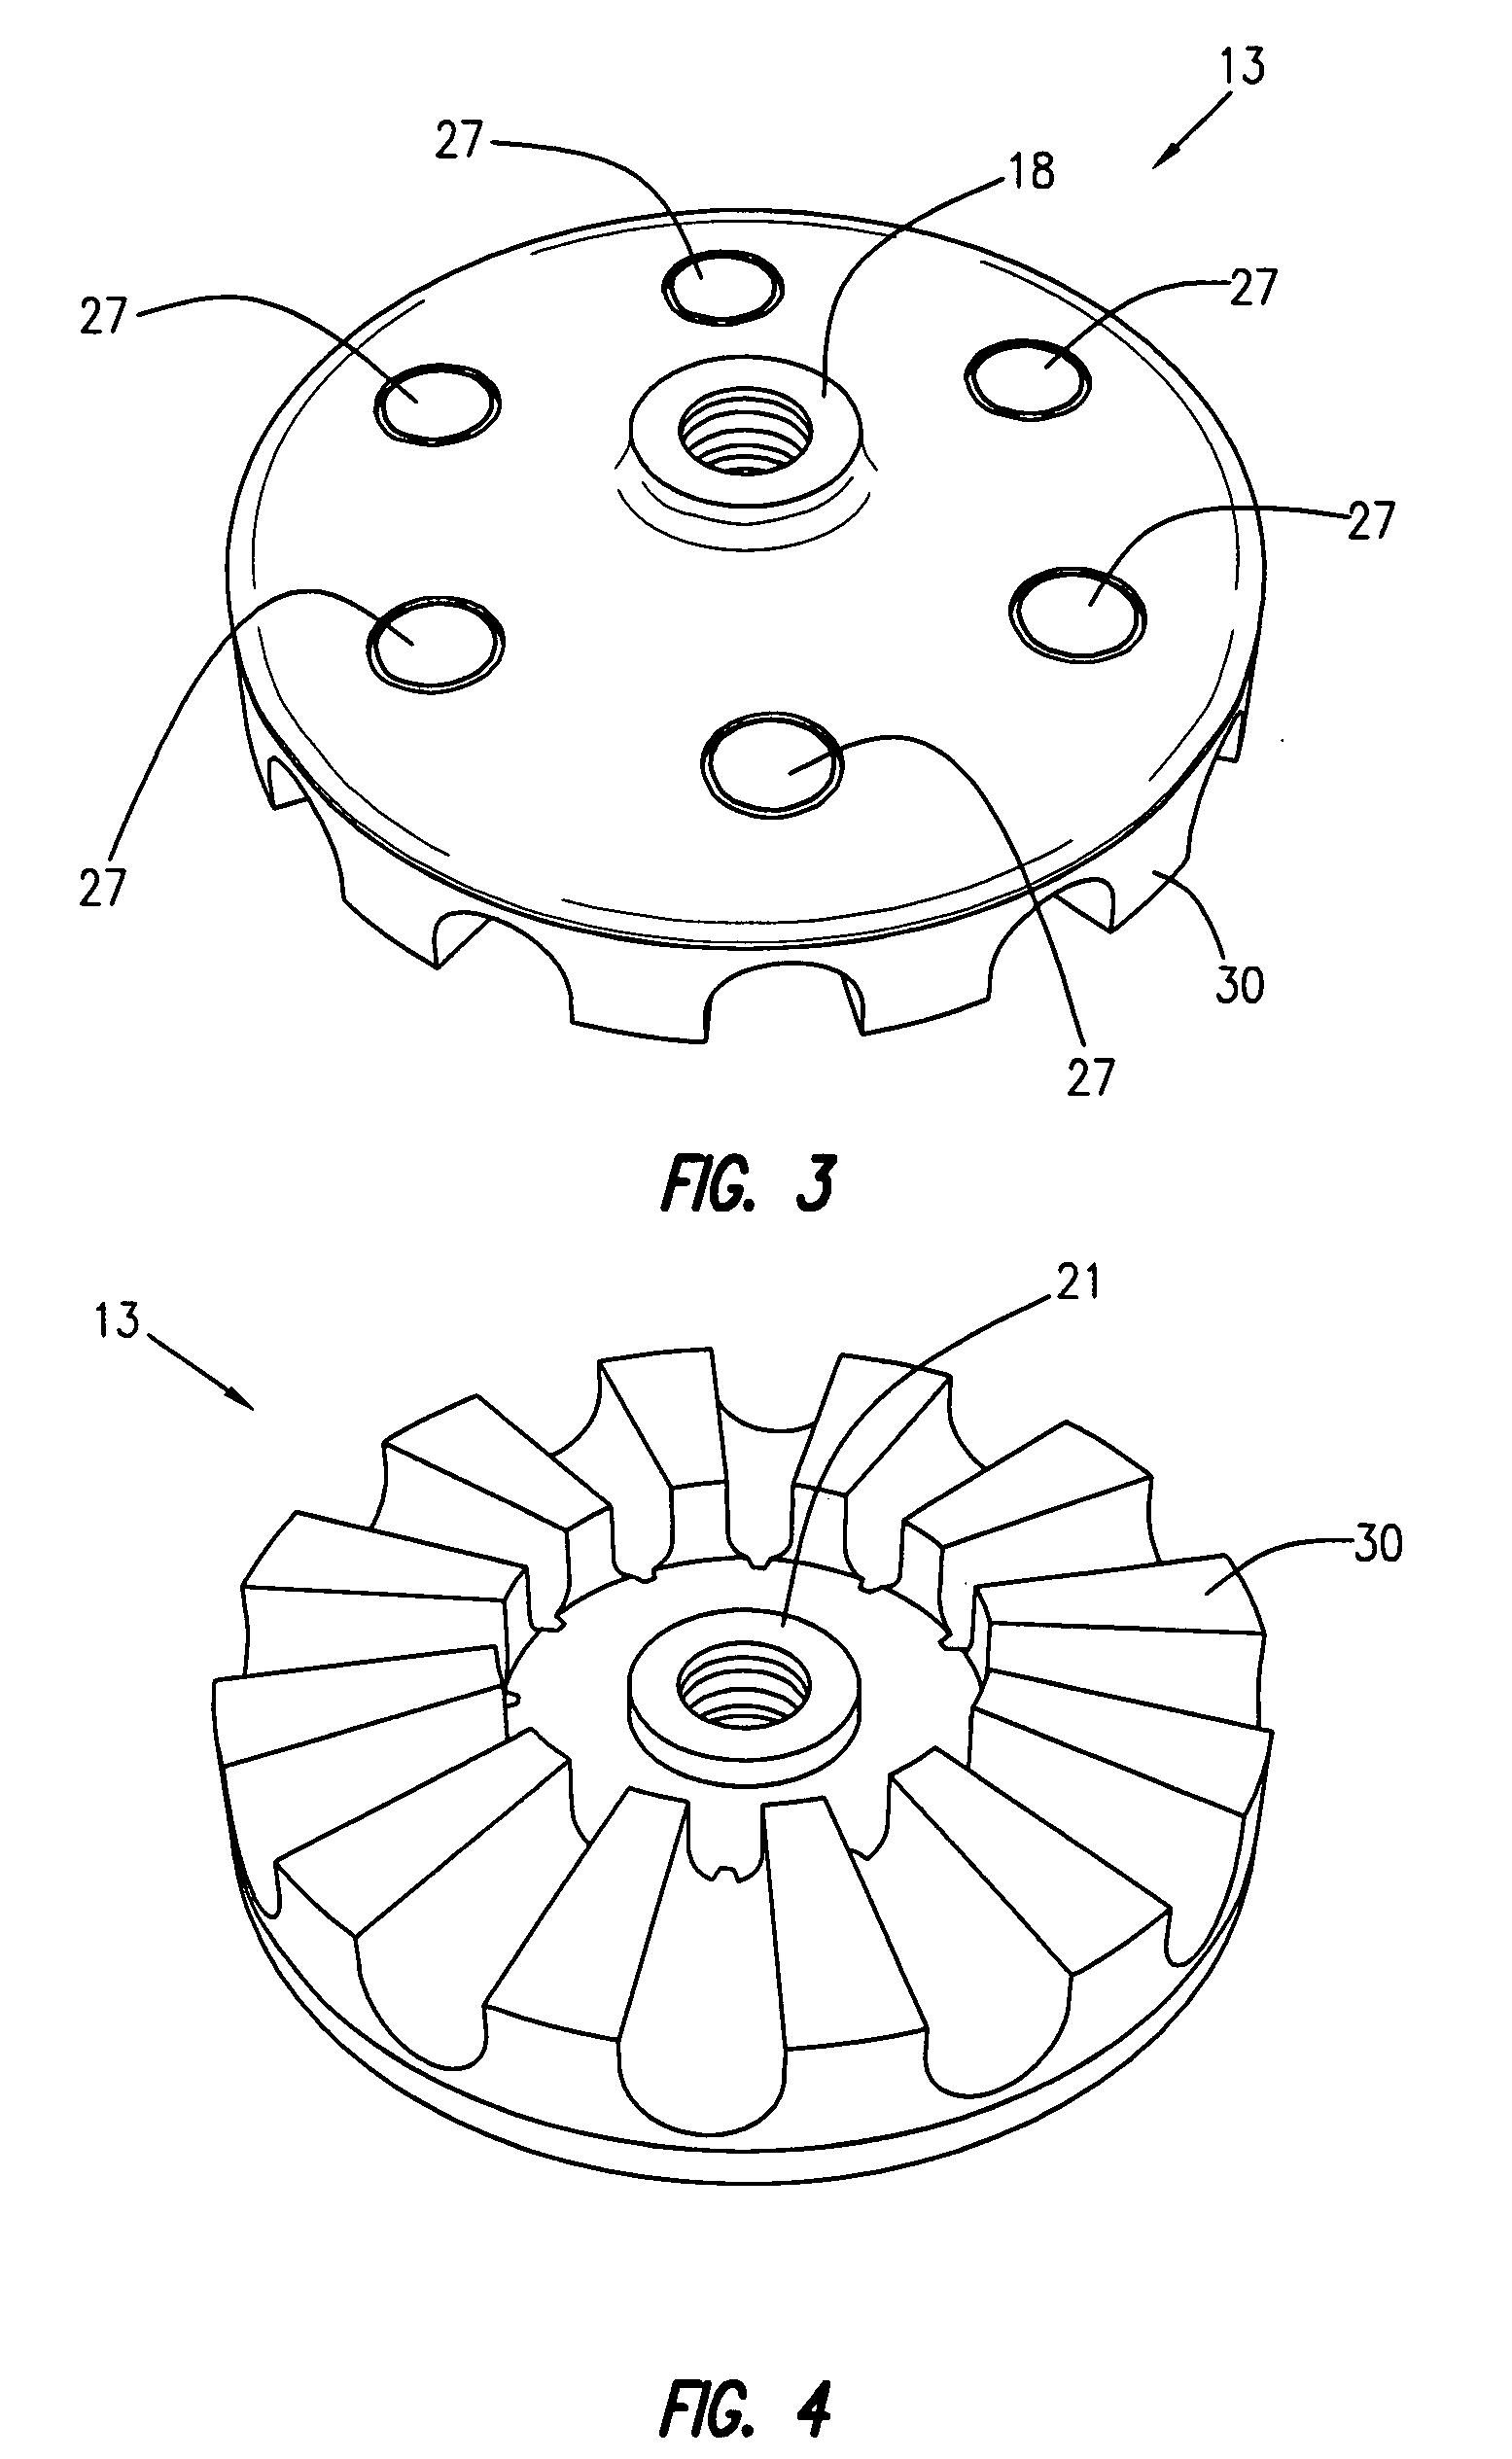 Eraser assembly for a rotary tool